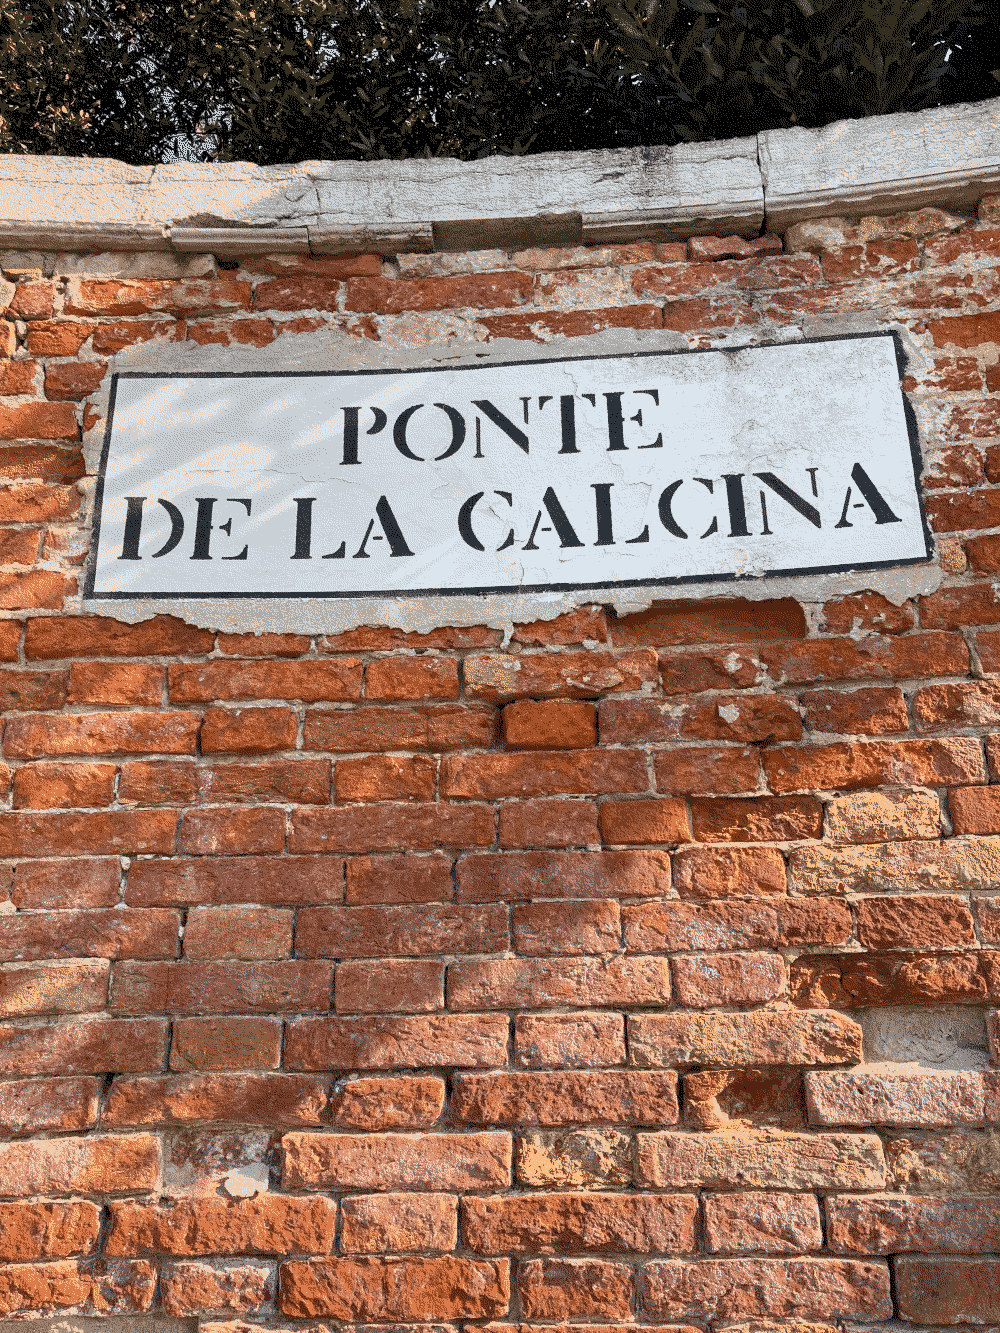 A coin is hidden in a brick wall with the street name PONTE DE LA CALCINA painted on it.